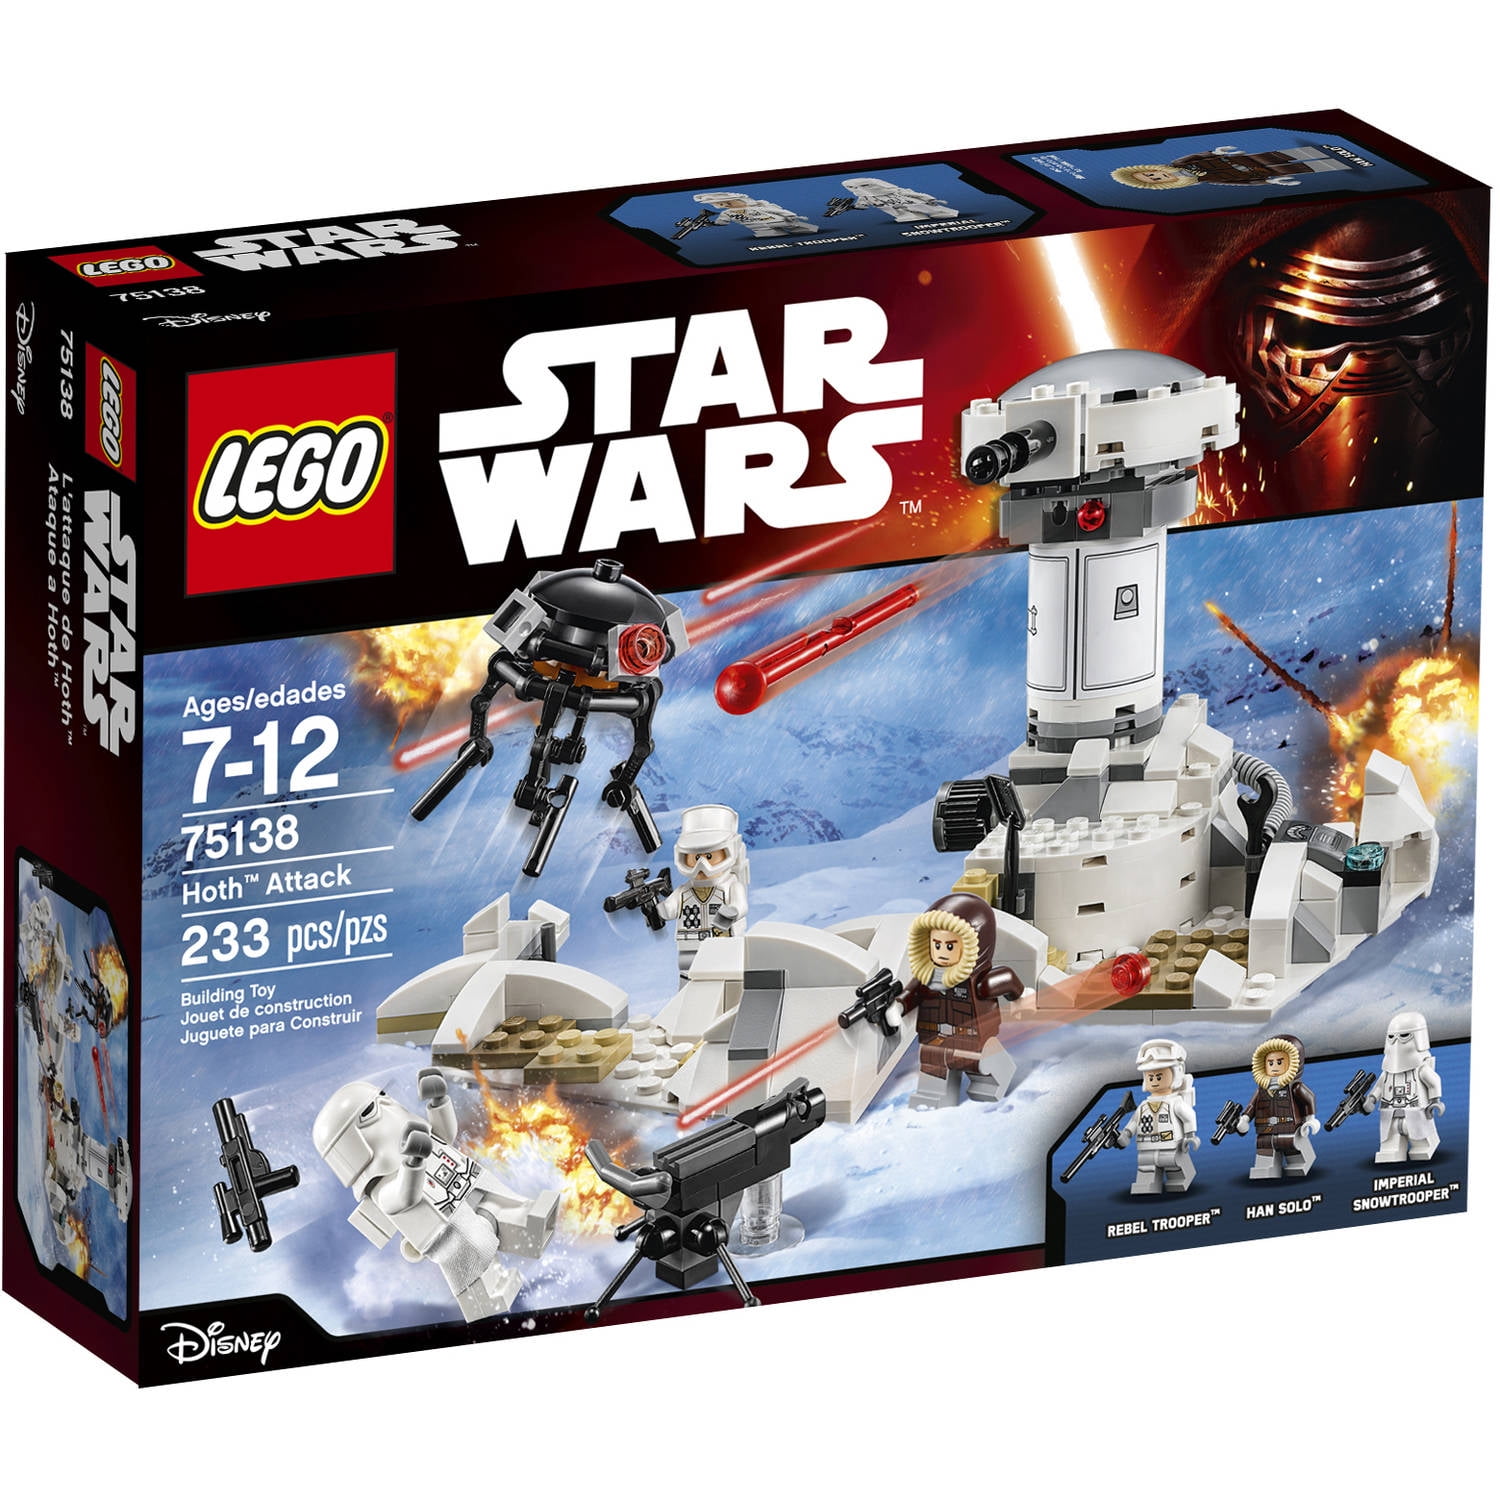 ▻ New LEGO Star Wars 2024 products: some official visuals are available -  HOTH BRICKS